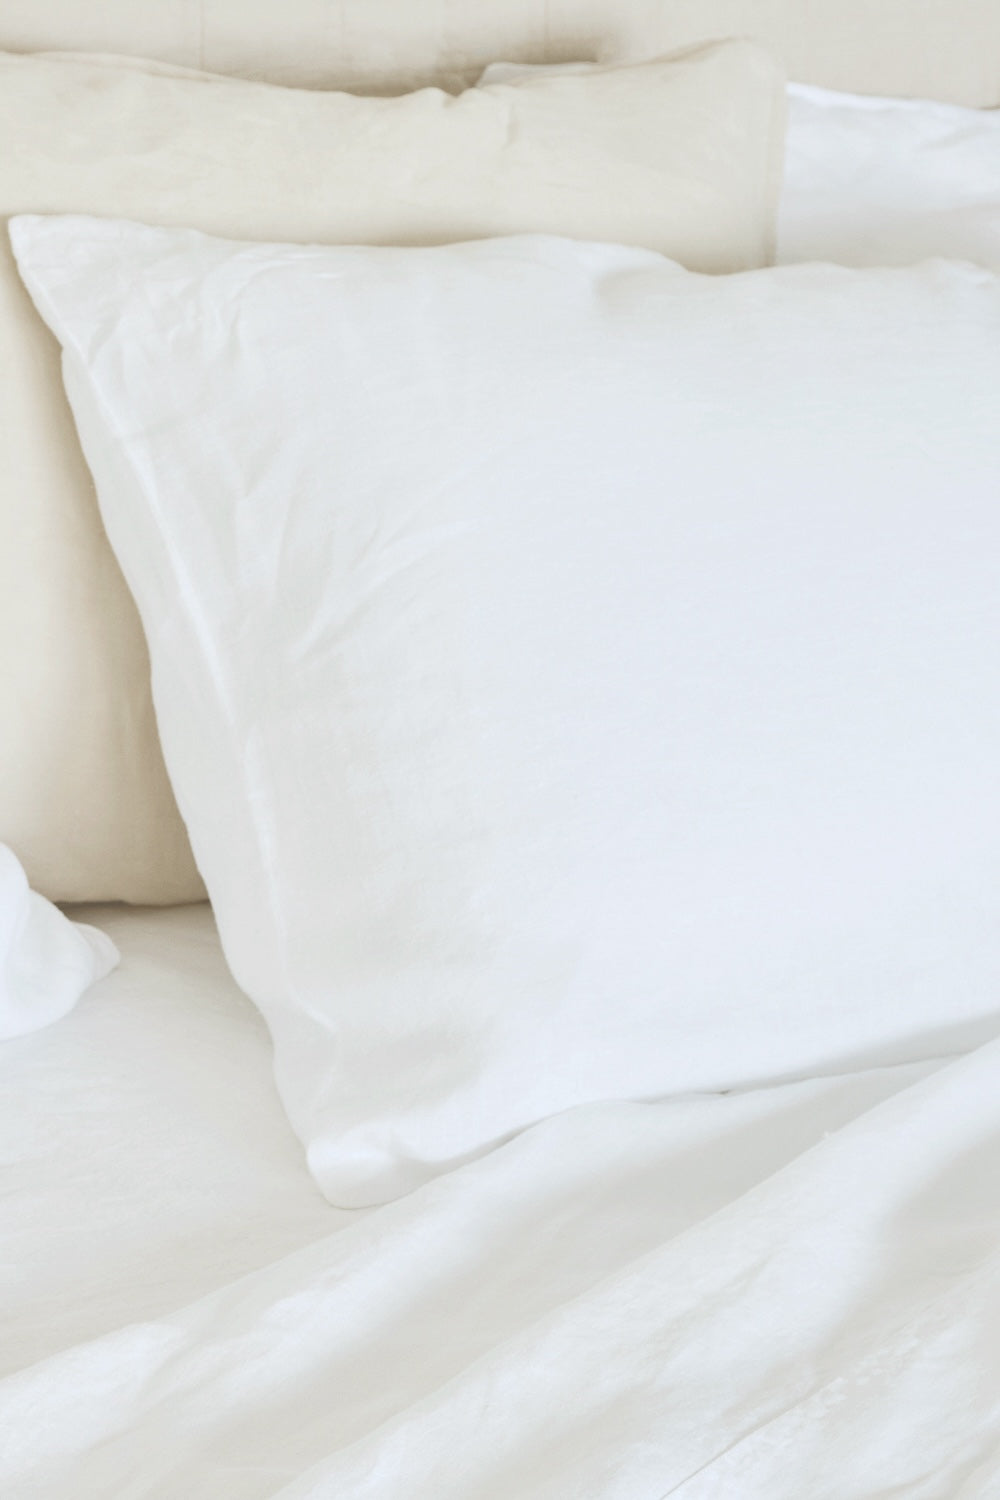 Evenfall Pillowcases | Jungmaven Hemp Clothing & Accessories / Color: Washed White